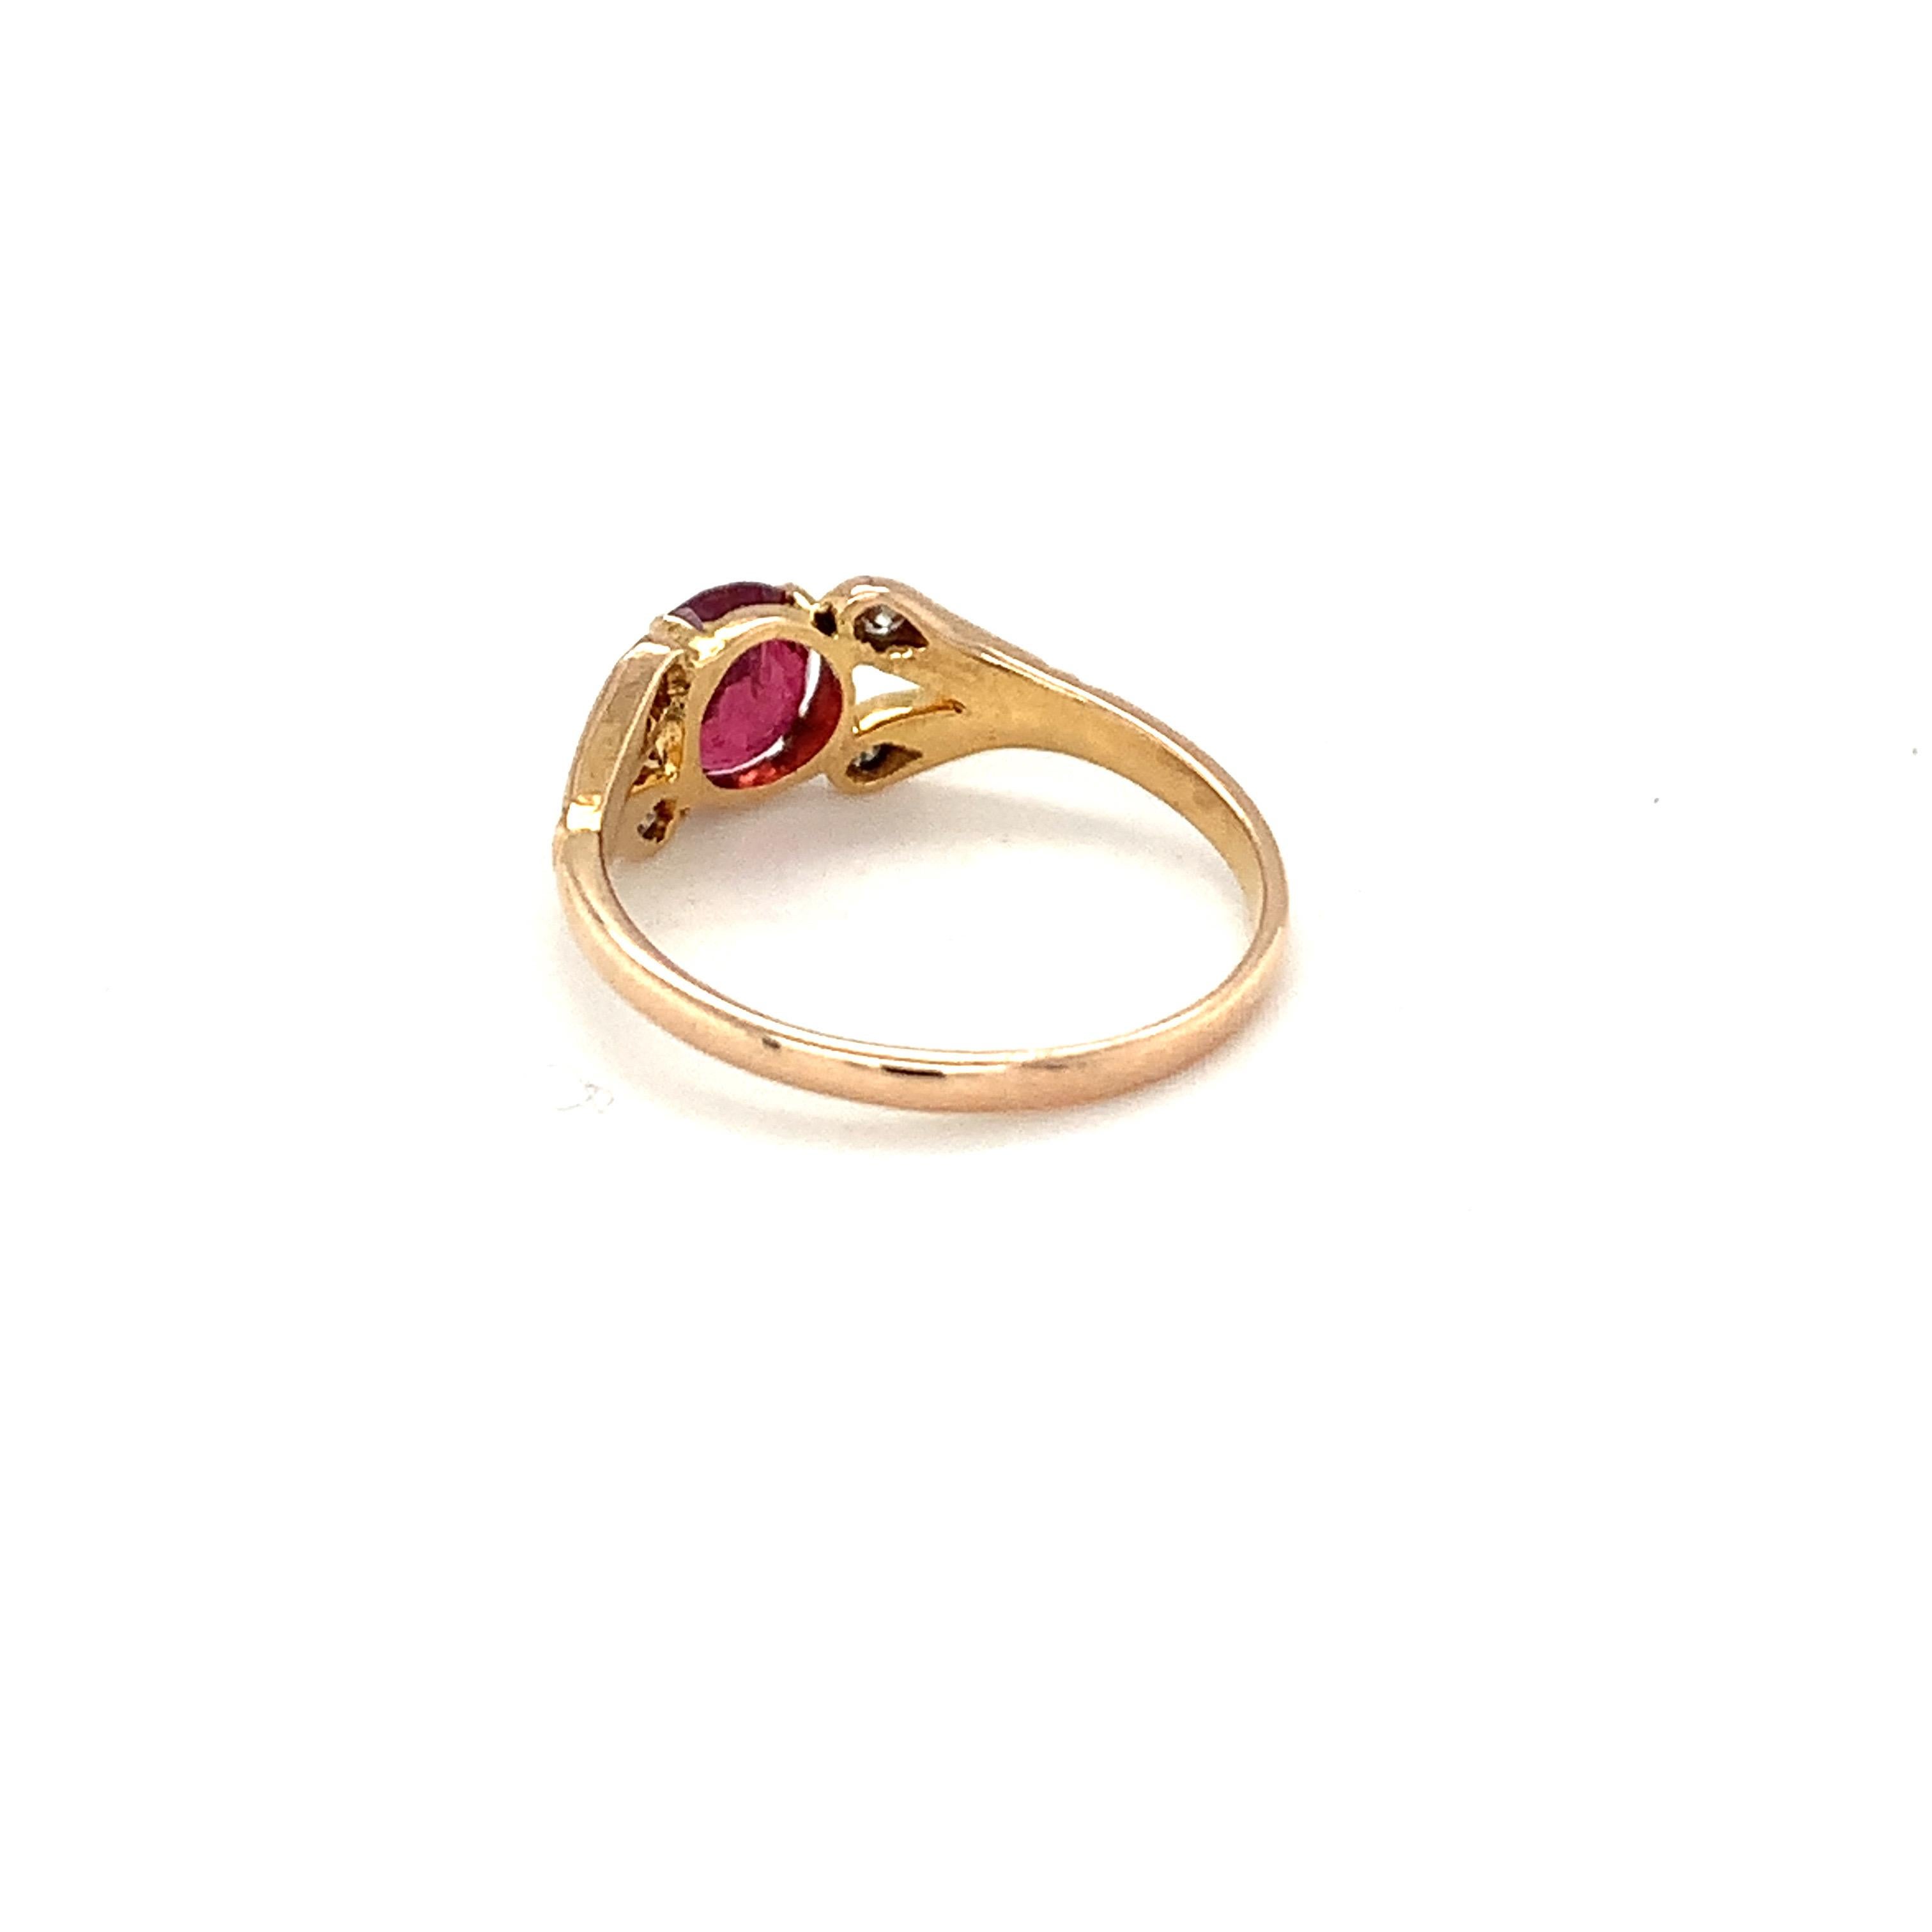 Hand cut and polished natural round ruby is crafted with hand in 14K yellow gold ring.
Ideal for daily casual wear.
Image is enlarged for a closer look
Ethically sourced natural gem stone.